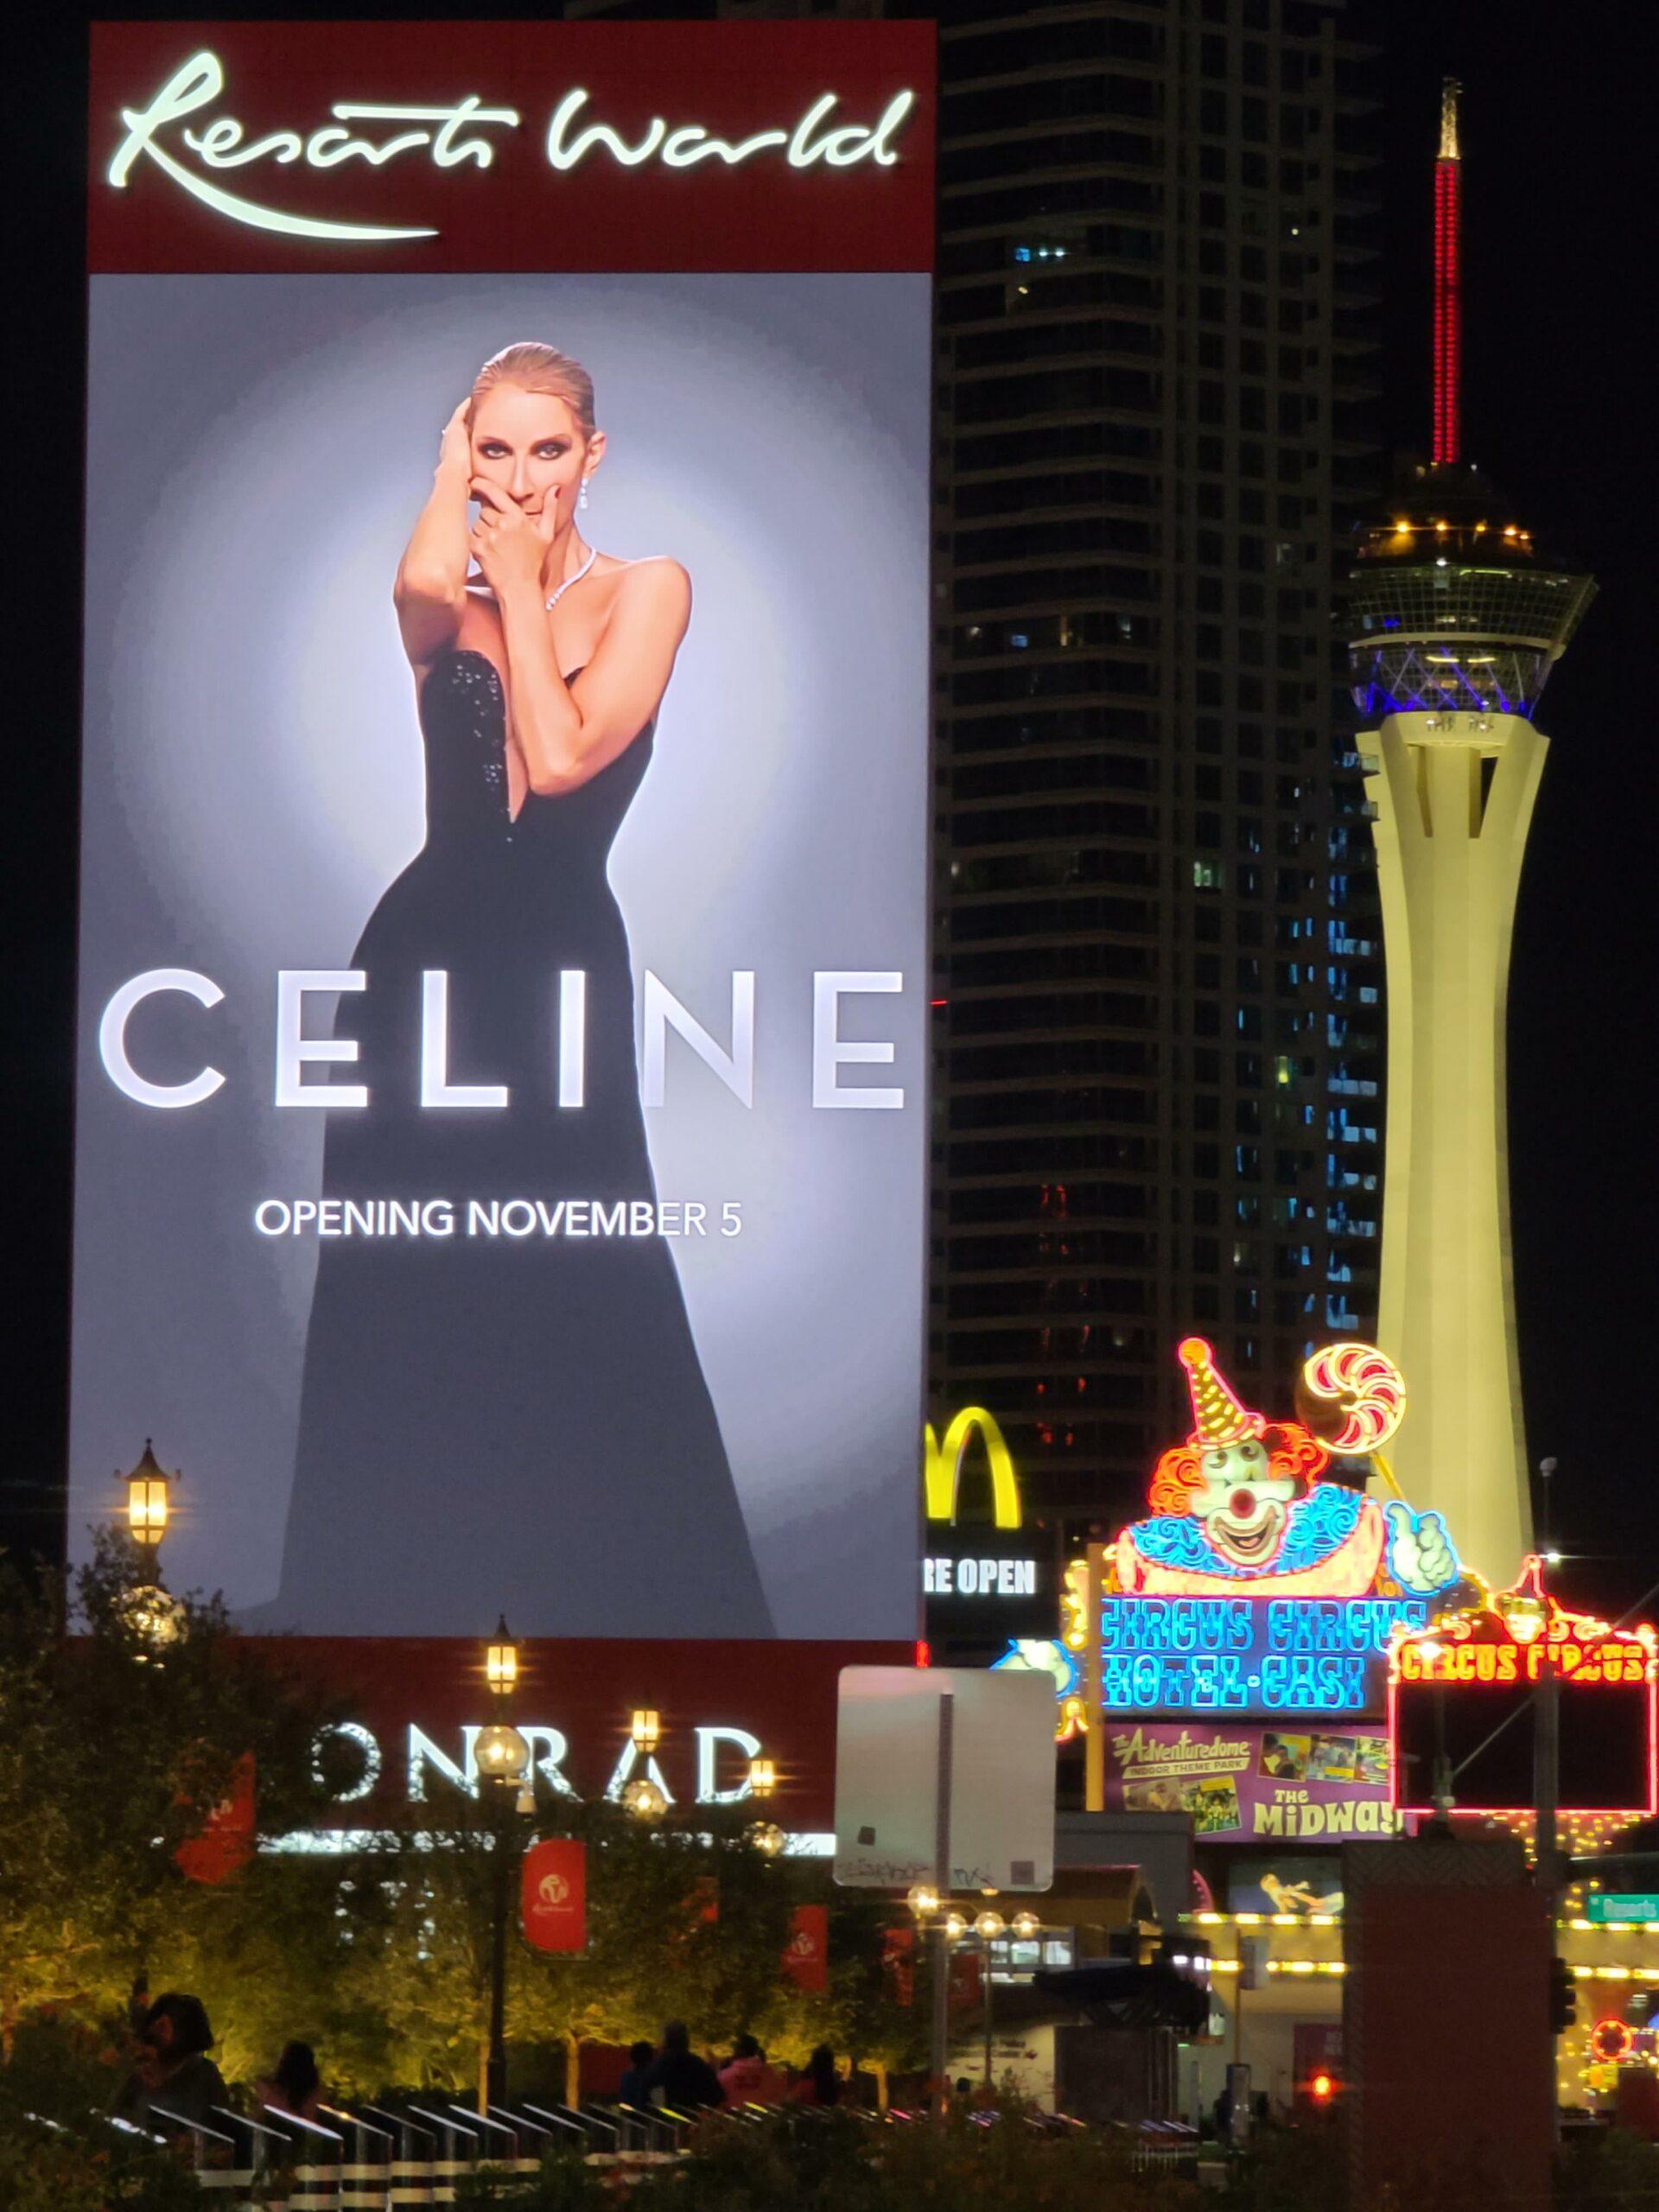 Giant Kylie Jenner Swim sign spotted on jumbotron at Resorts World on 4th anniversary of Las Vegas shooting as billboard honors victims